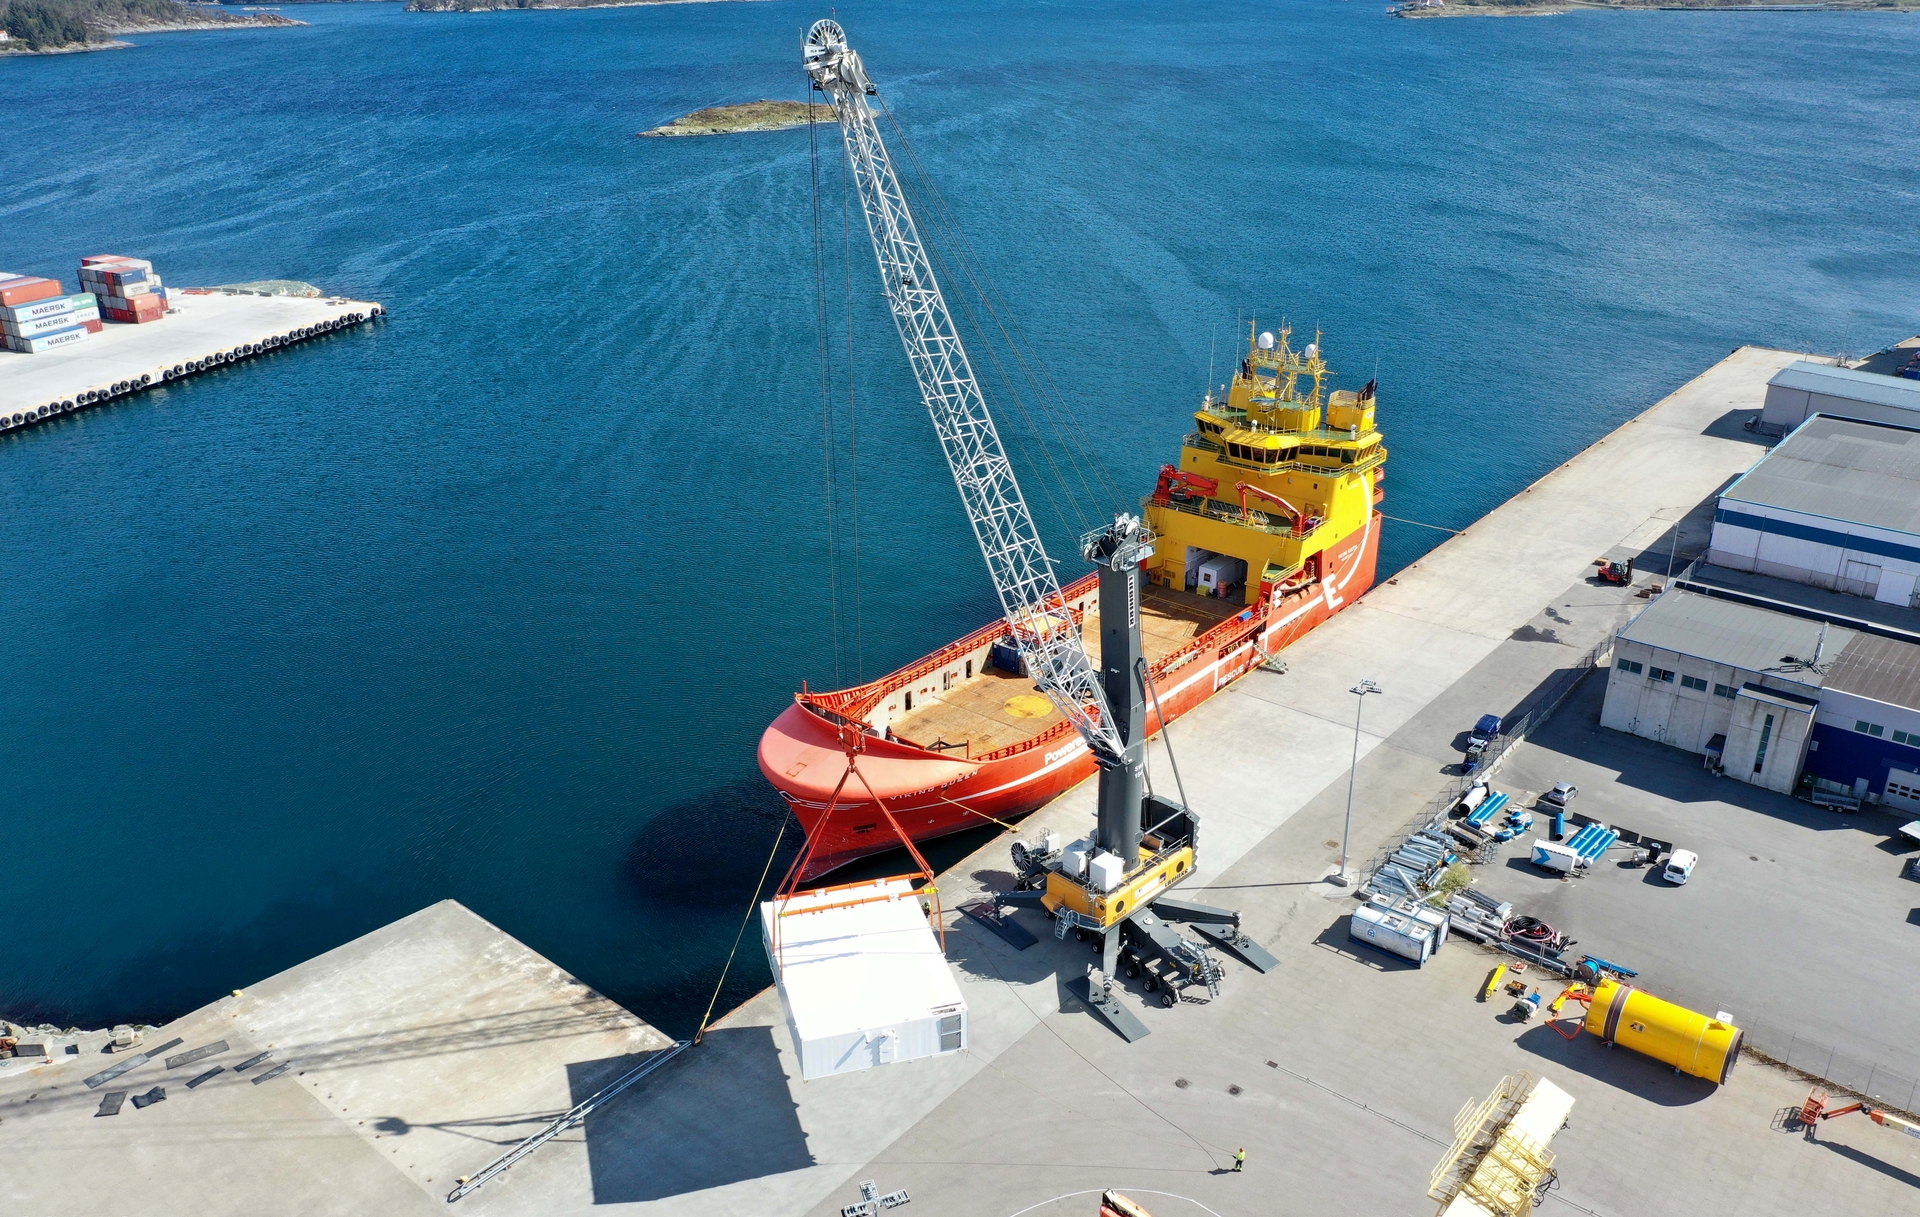 Port of Karmsund buys another LHM 550